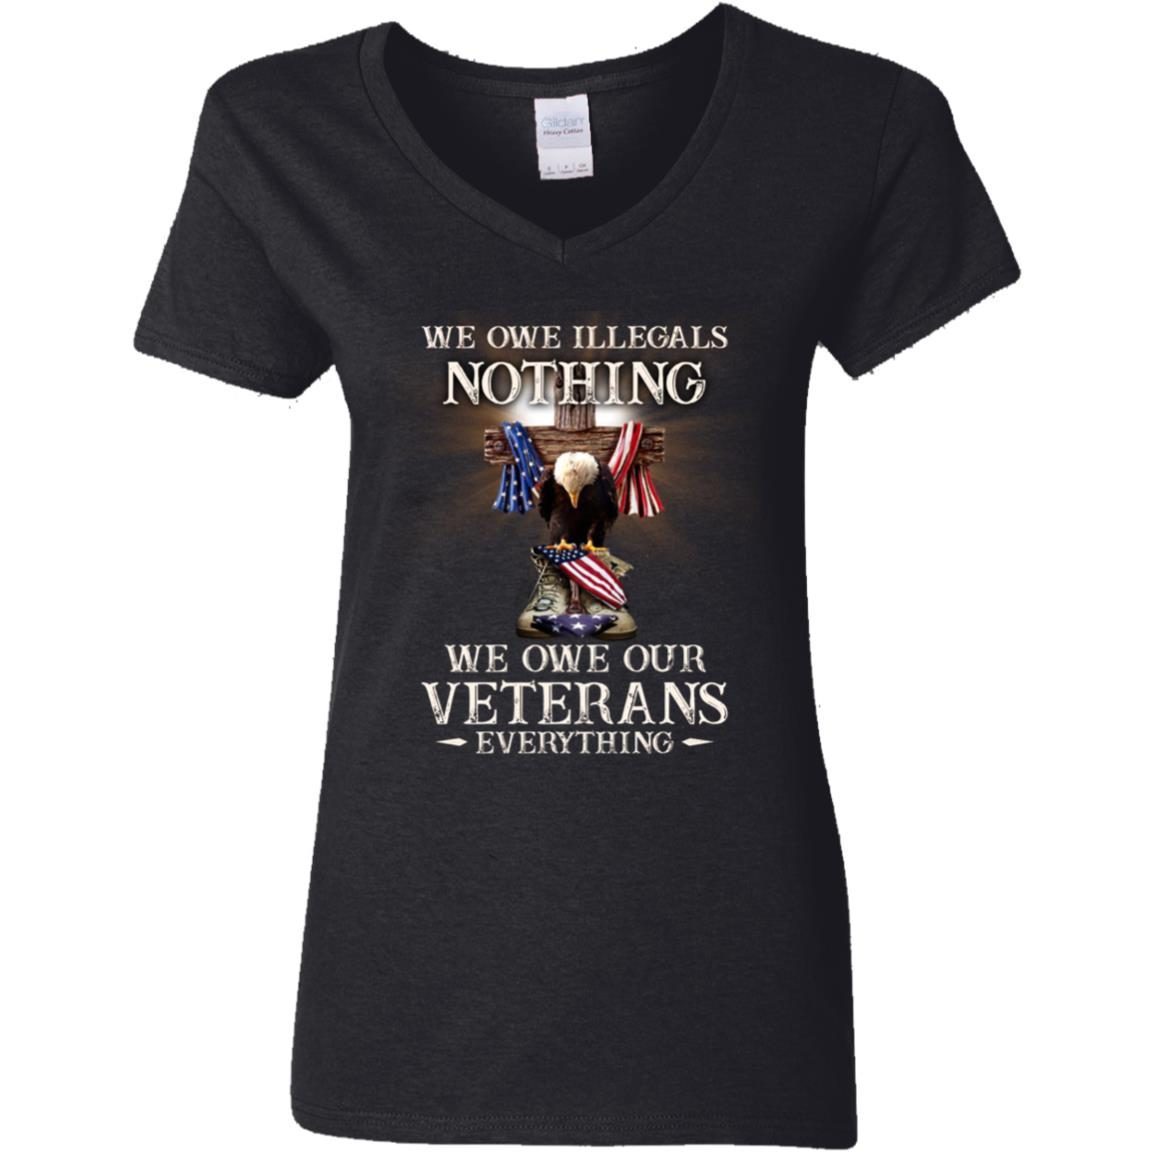 We Owe Illegals Nothing We Owe Our Veterans Everything shirt